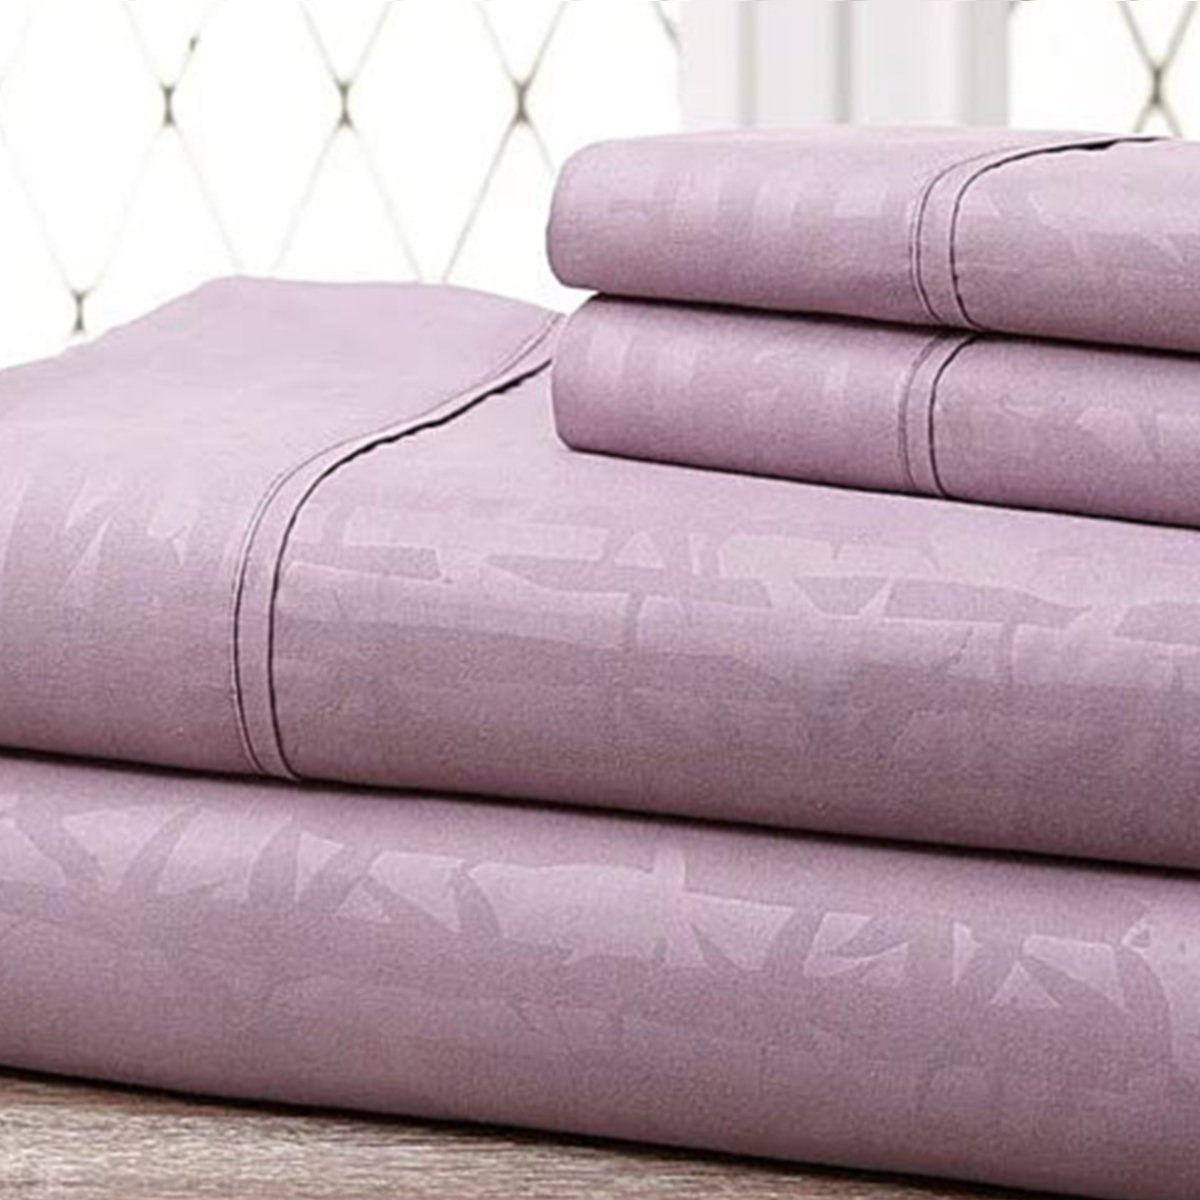 Super-soft 1600 Series Bamboo Embossed Bed Sheet, Lilac - Full, 4 Piece